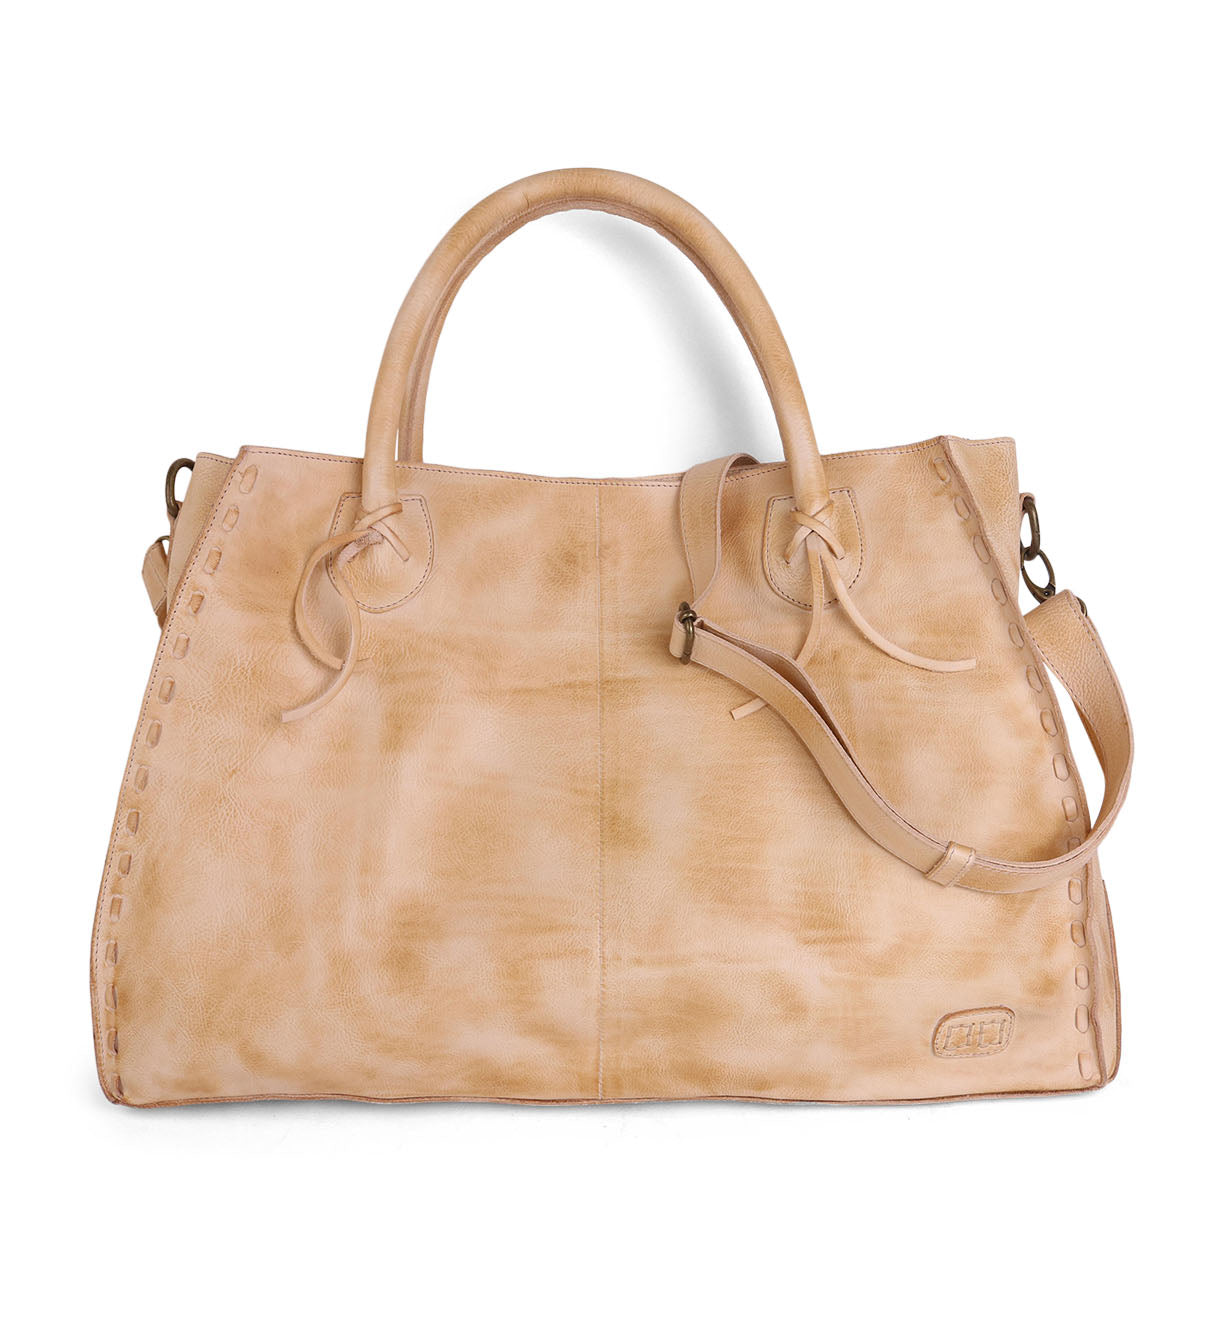 The Bed Stu ROCKAWAY tote bag in tan leather is a best-selling accessory.